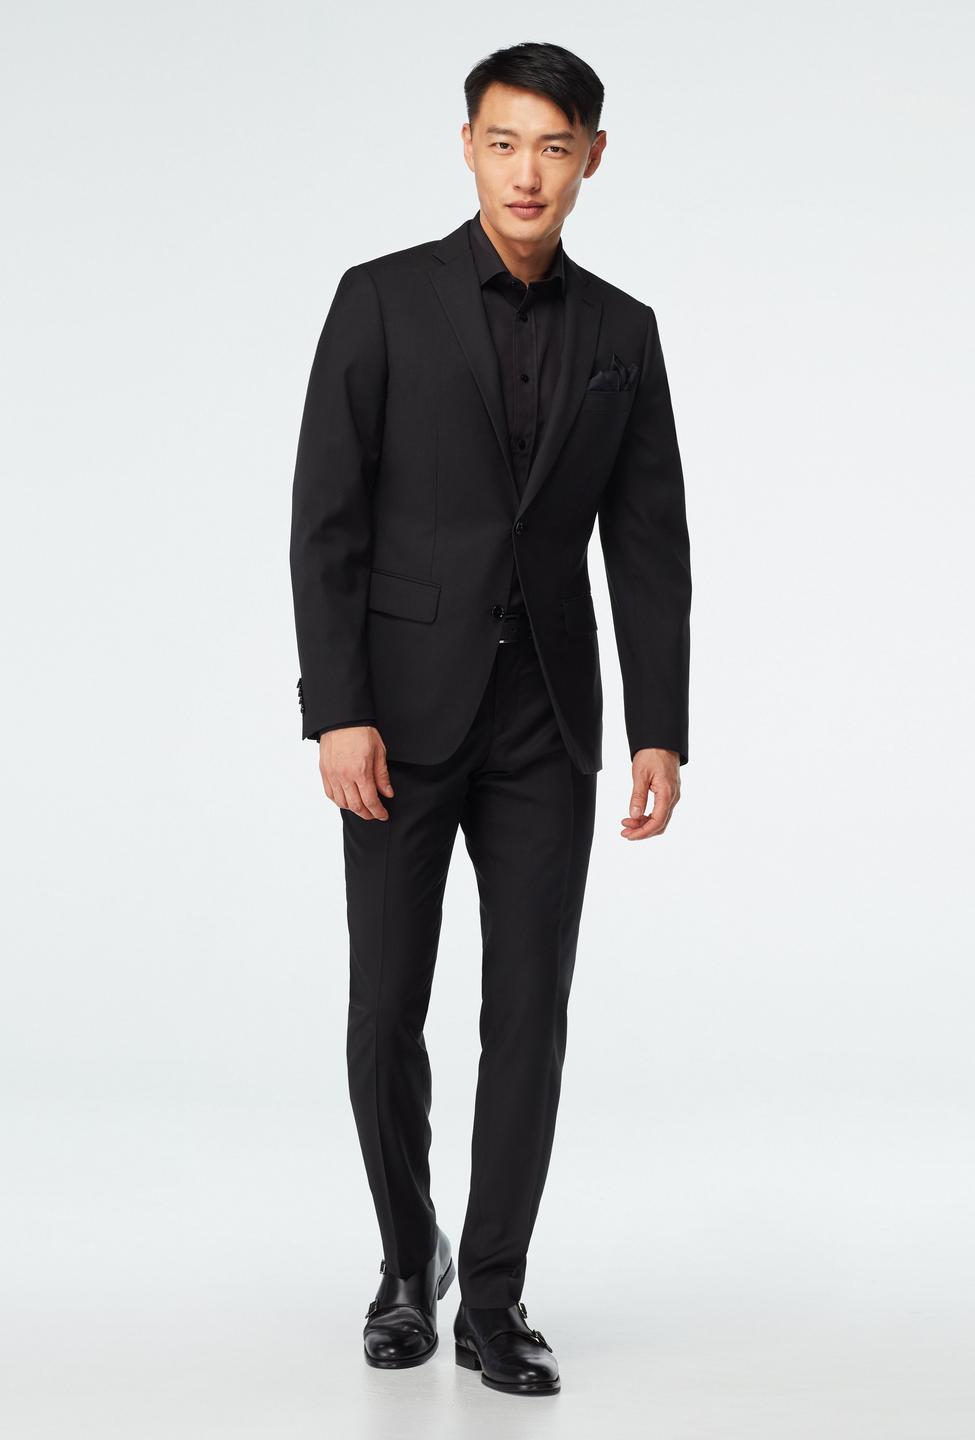 Black suit - Milano Solid Design from Indochino Collection